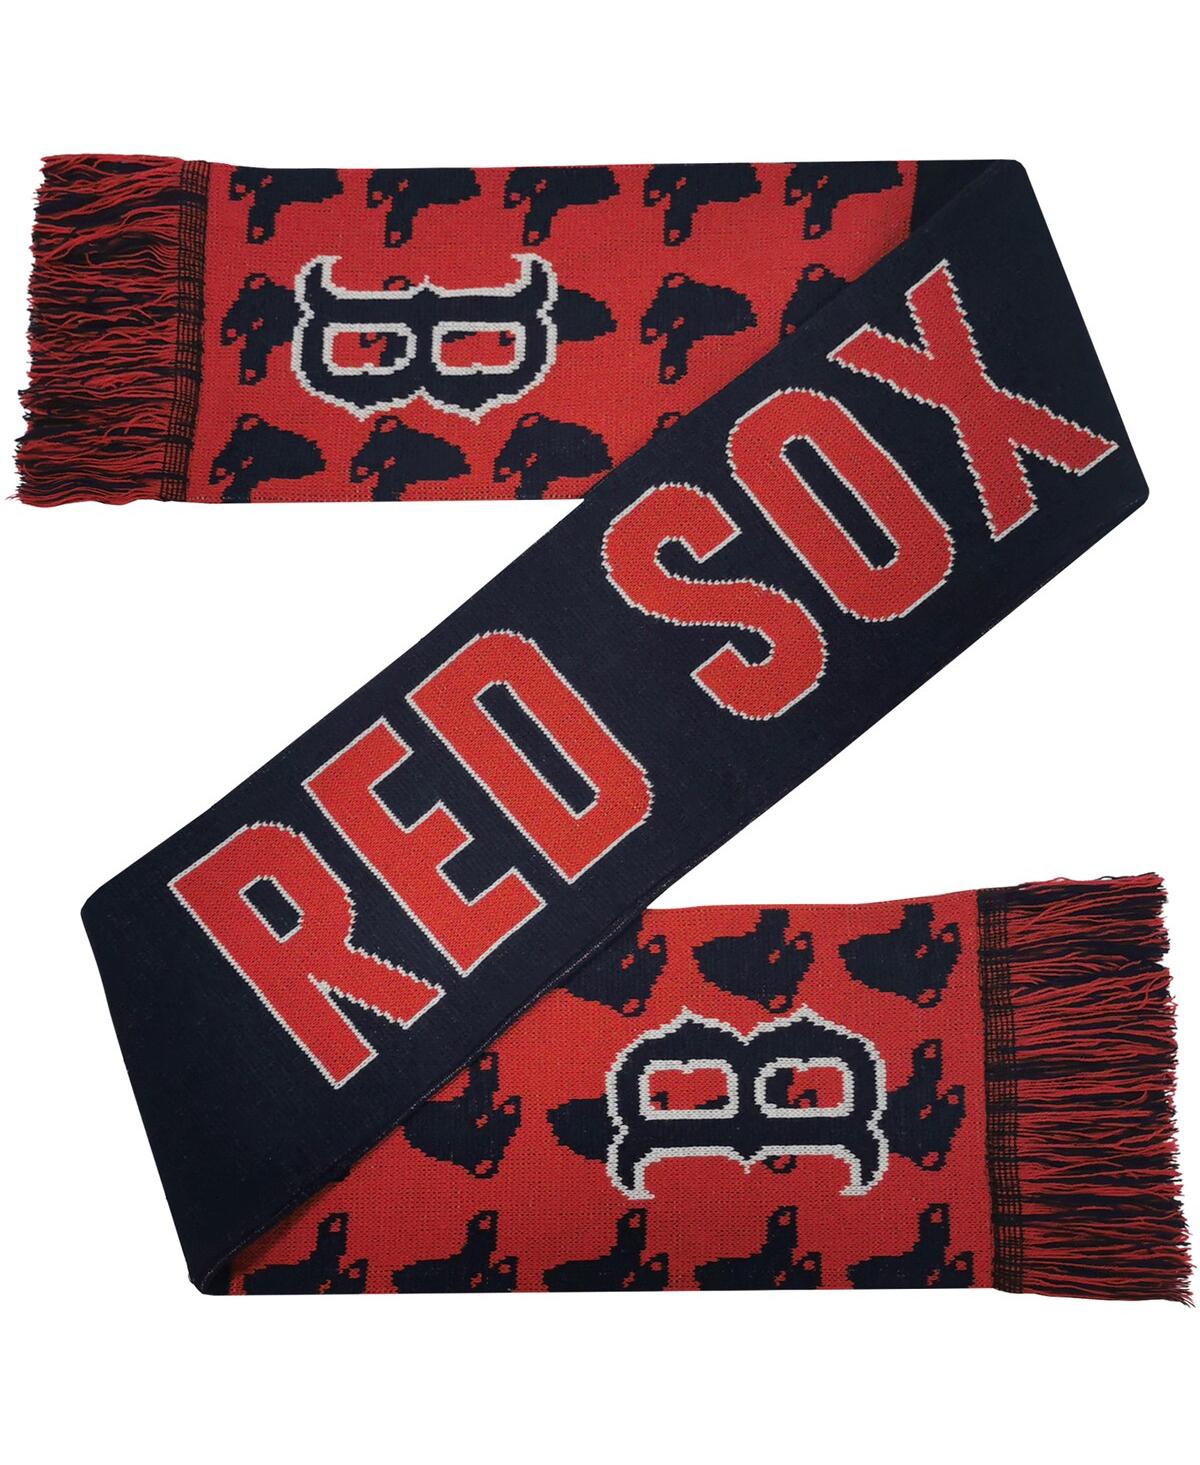 Men's and Women's Foco Boston Red Sox Reversible Thematic Scarf - Red, Black